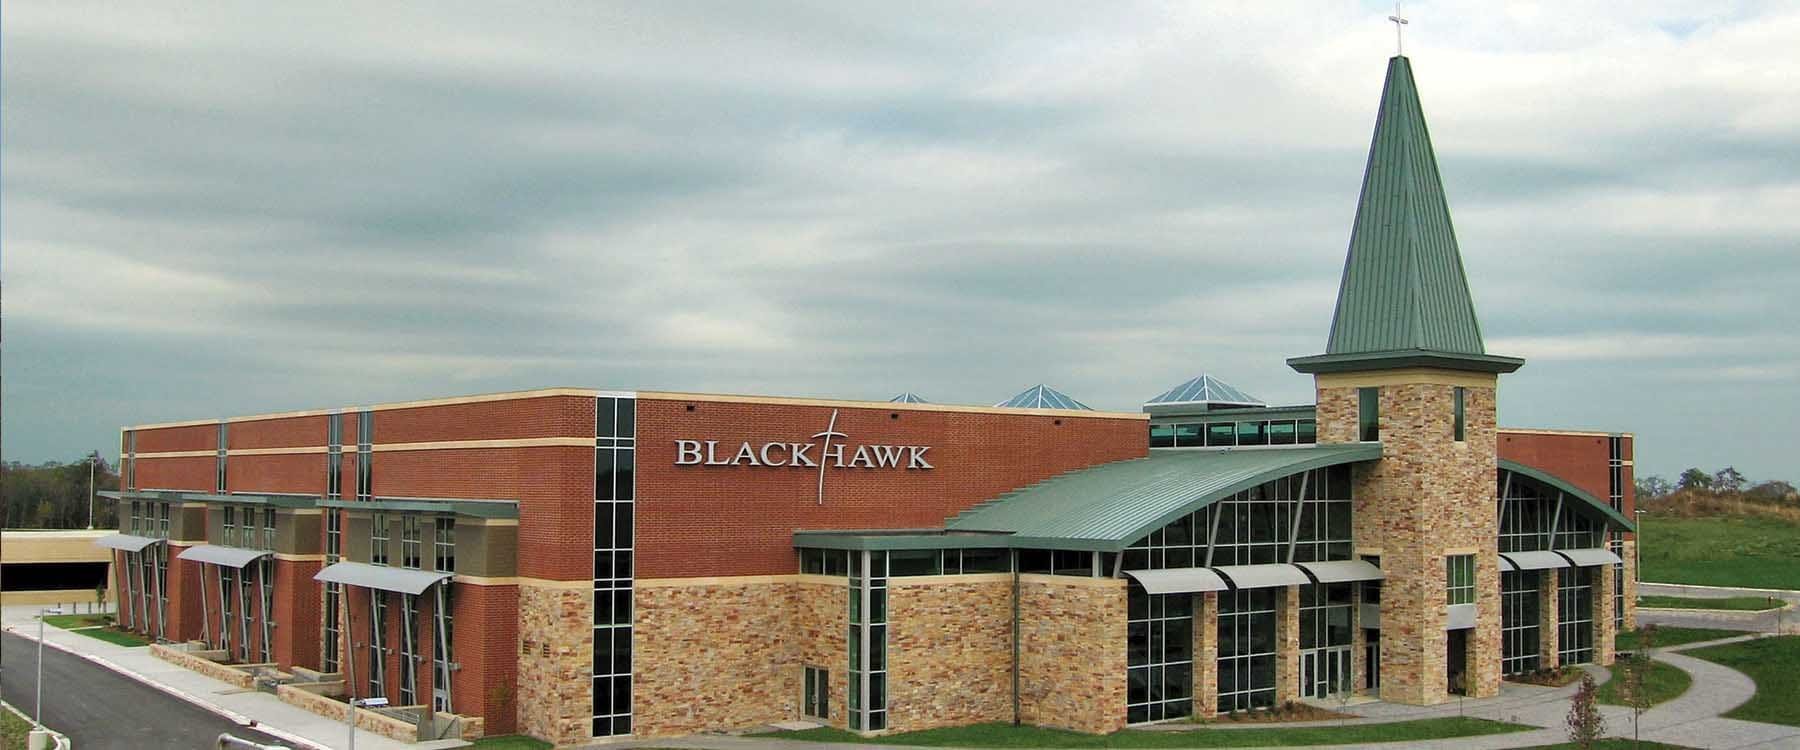 Blackhawk Church Entrance combines modern design with traditional church architecture to provide something new for Middleton, Wisconsin